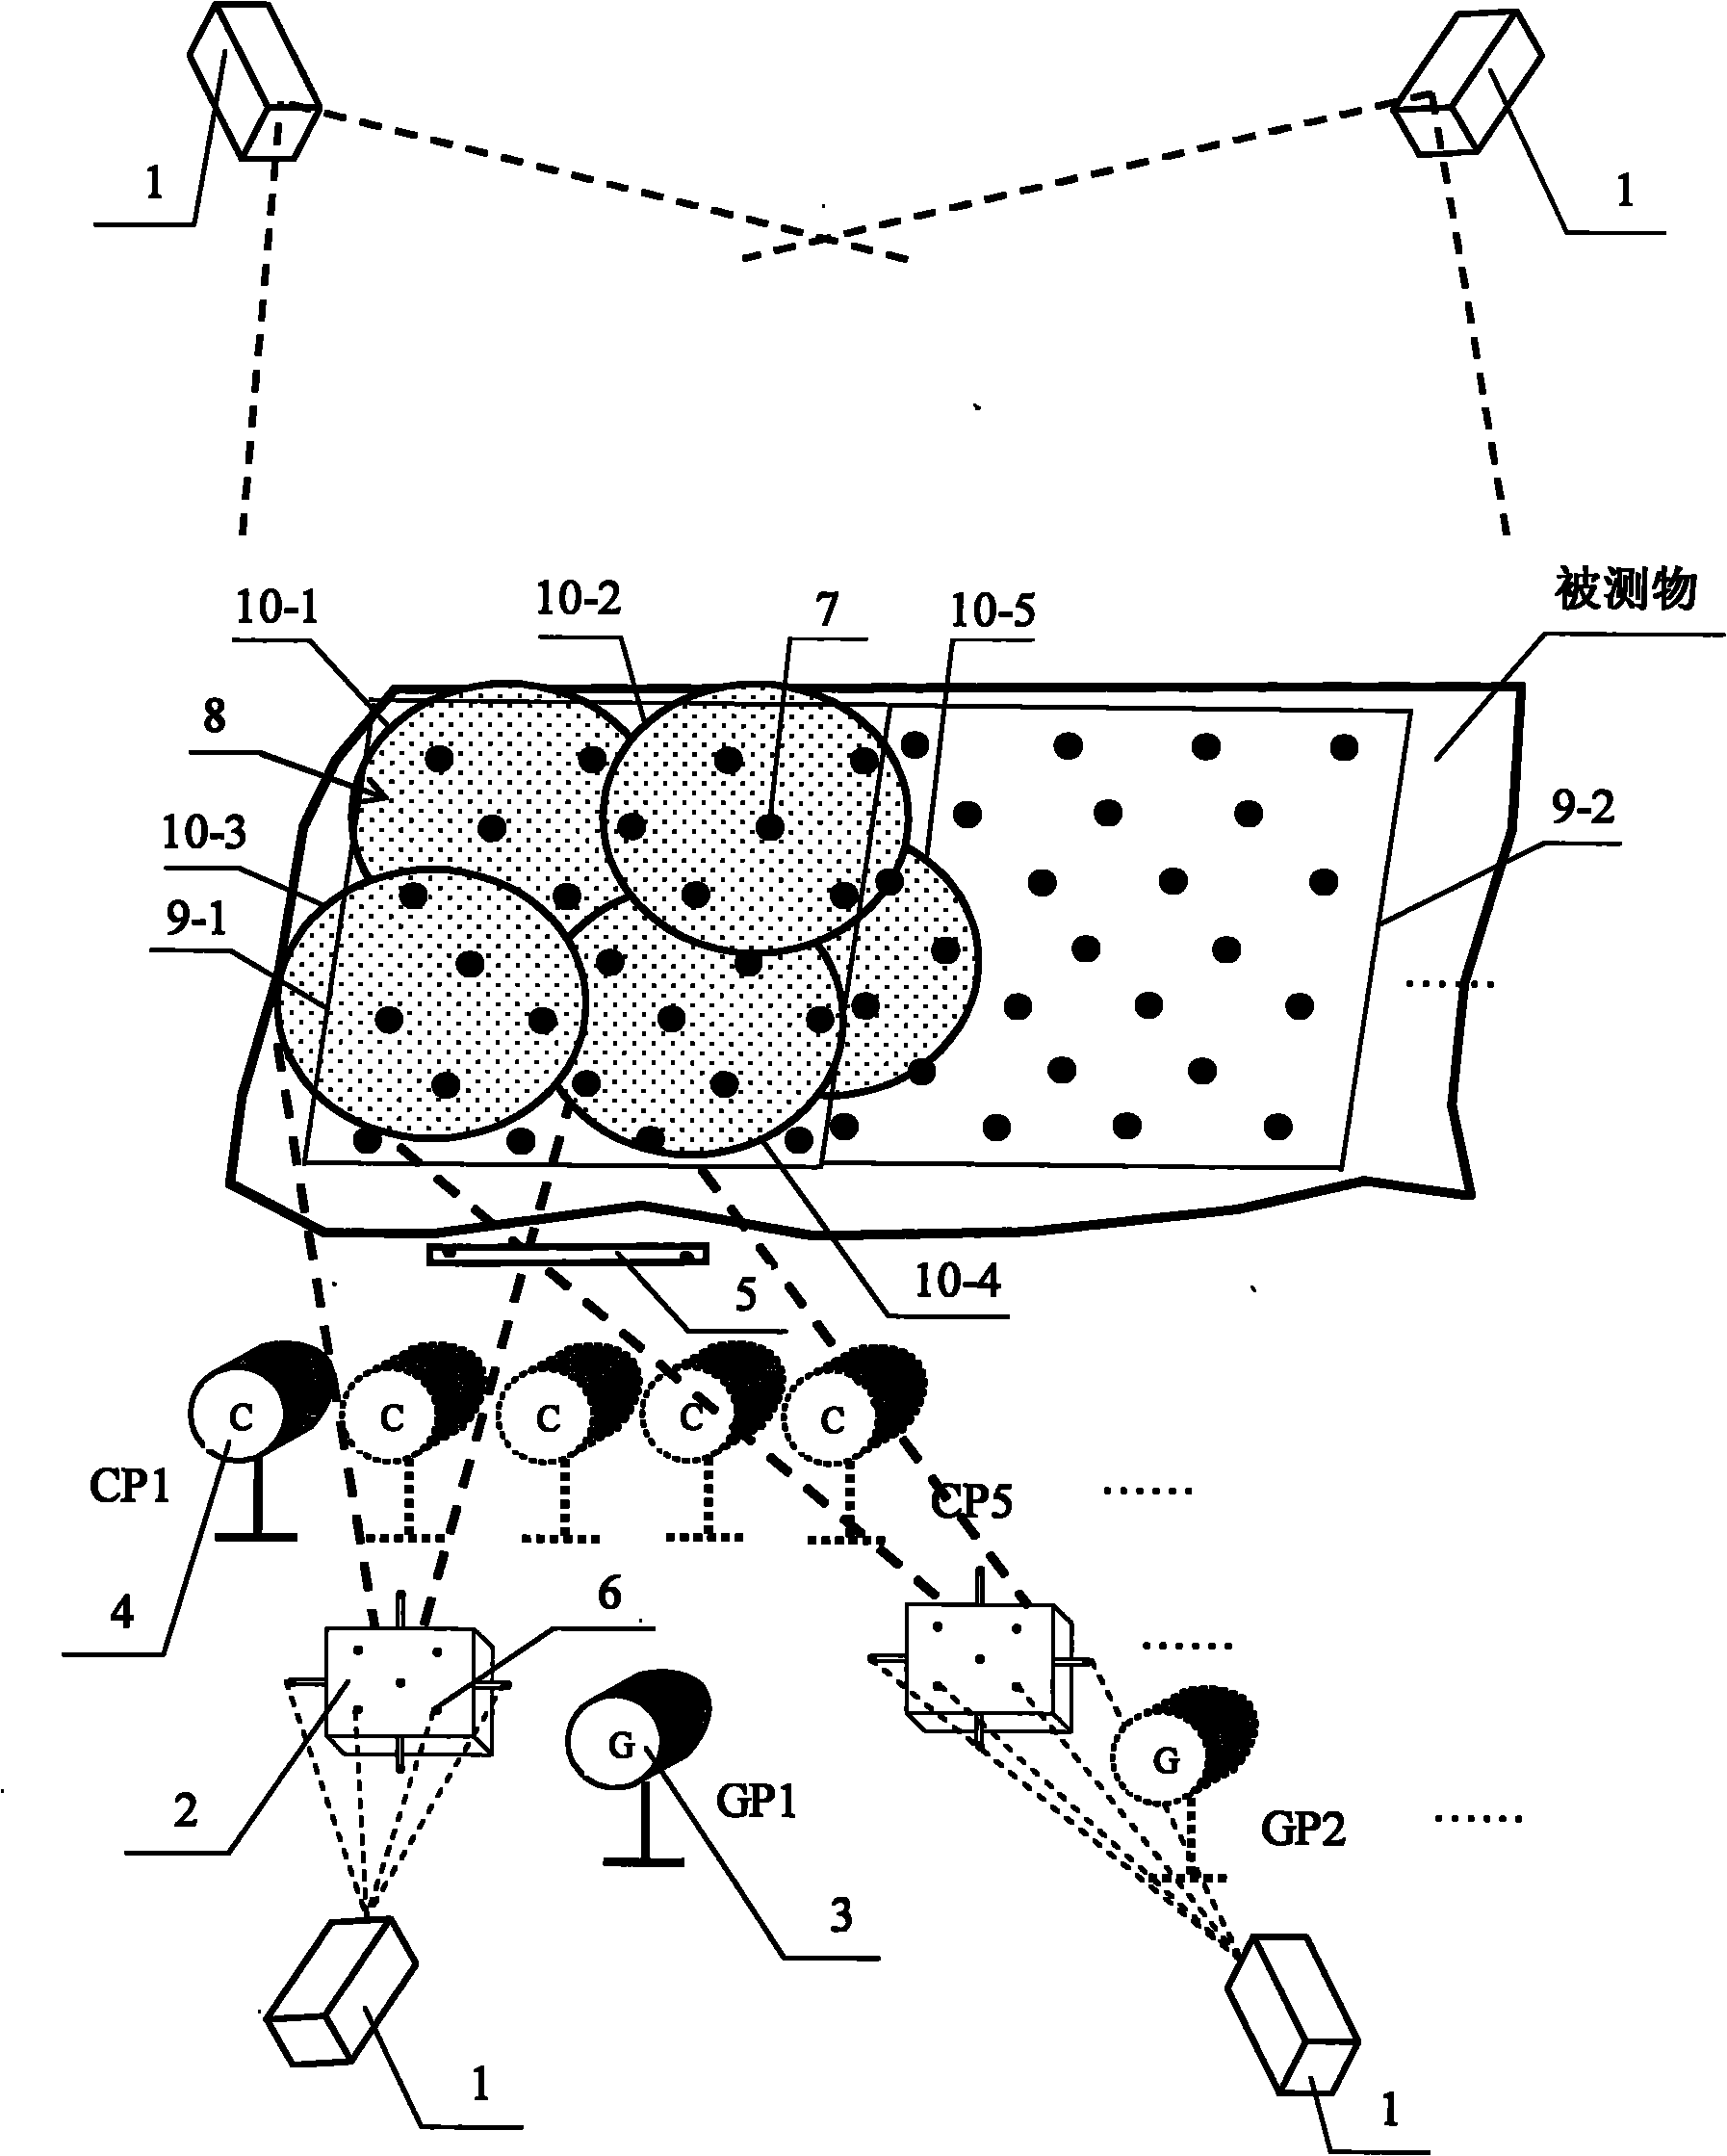 Absolute non-interfering precision measuring method facing ultra-large spatial complex curved surface